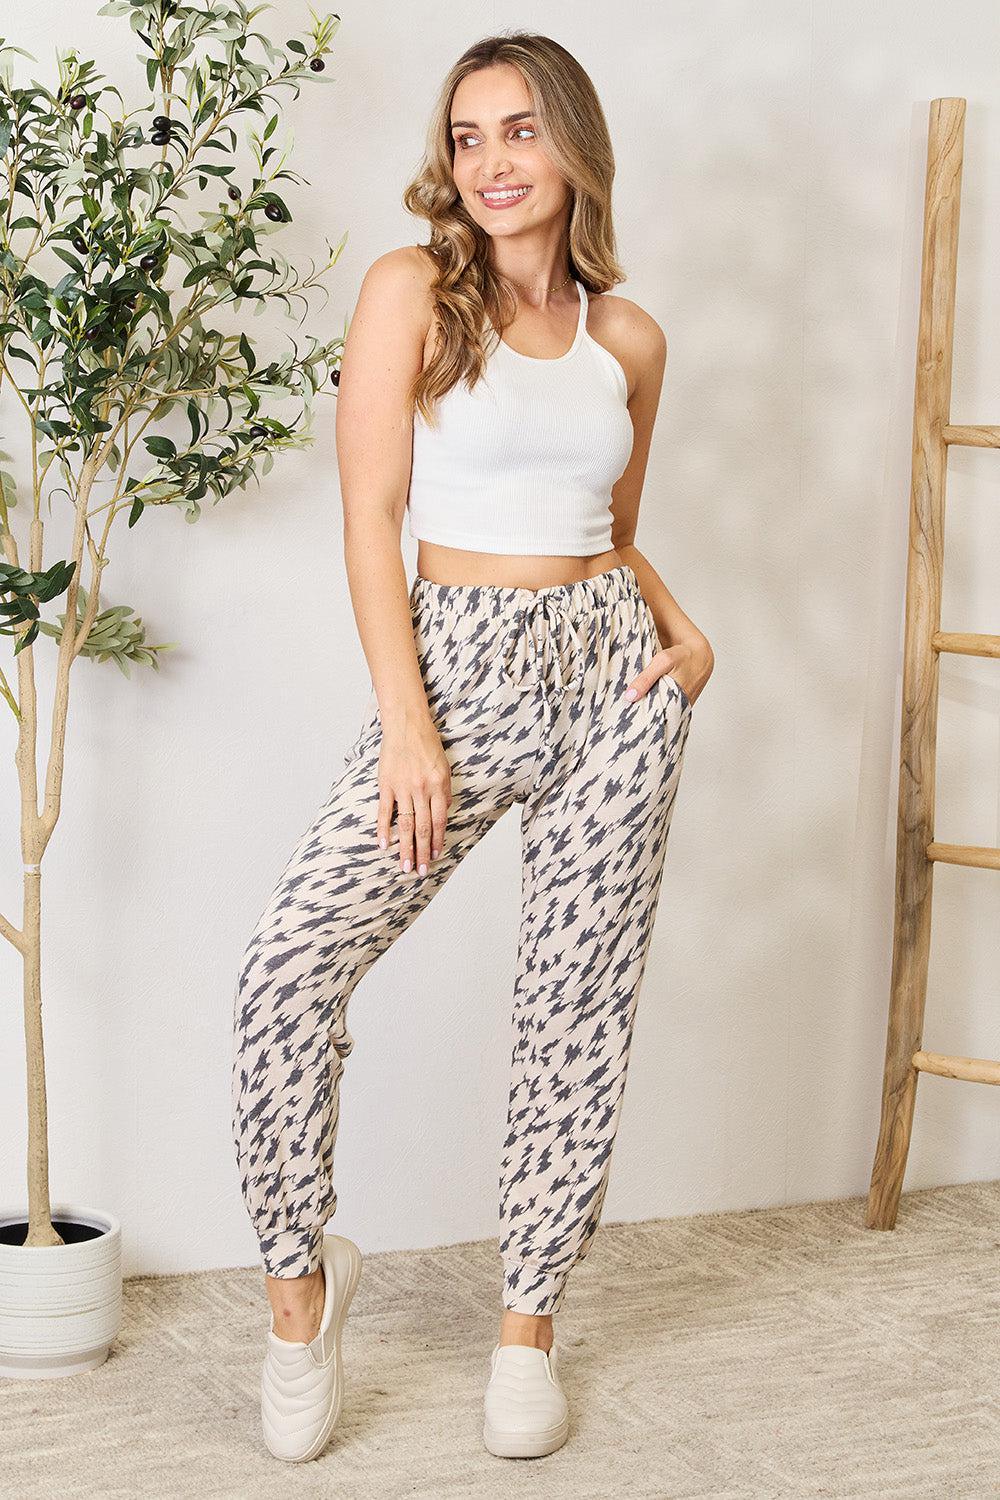 a woman in a white tank top and patterned pants